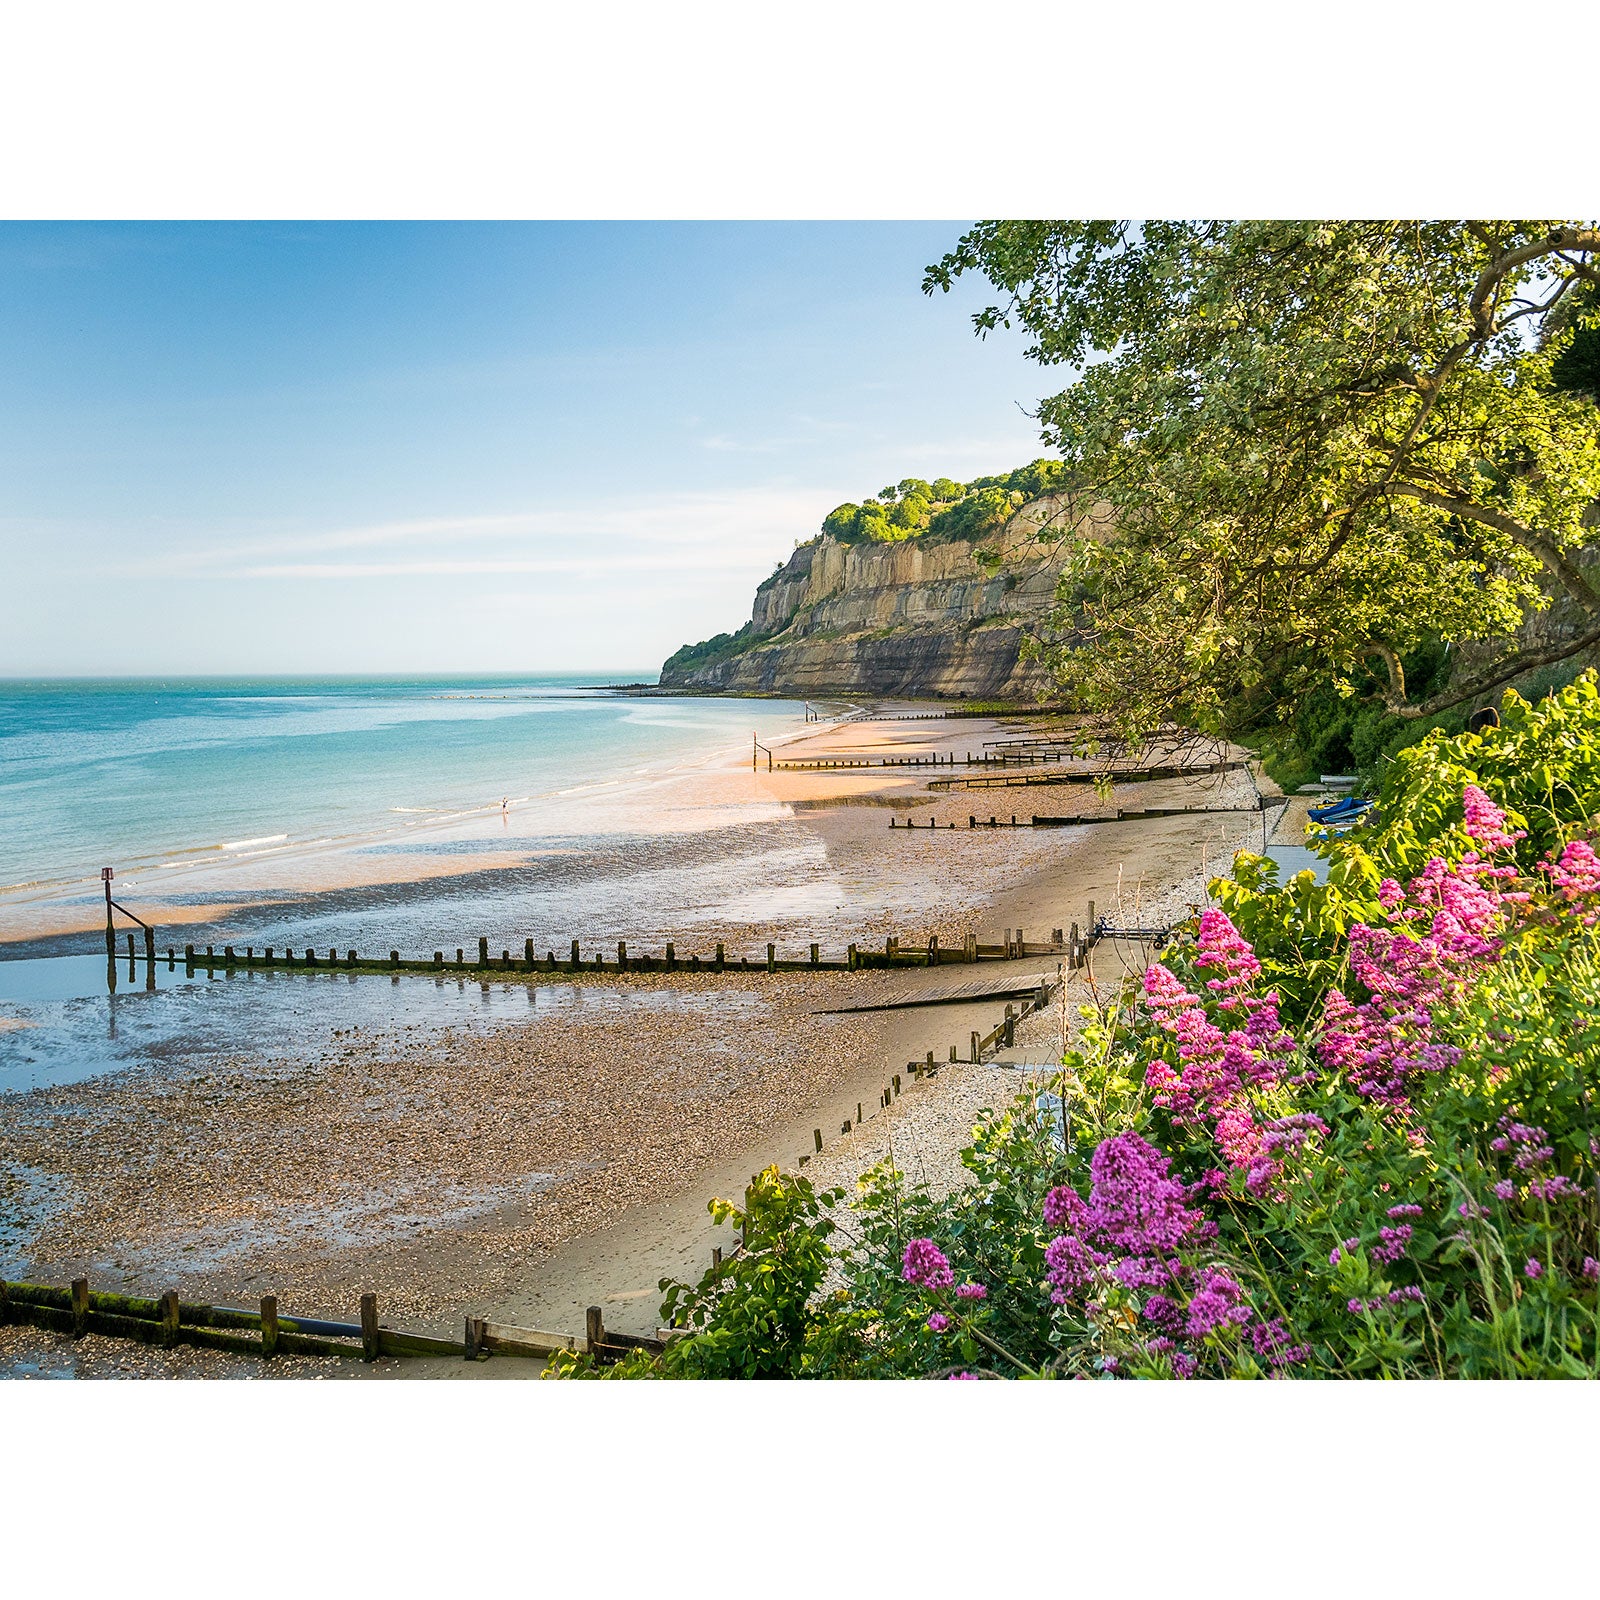 A scenic view of Shanklin Beach on the Isle of Wight with a groynes system, backed by cliffs and framed by vibrant pink flowers in the foreground taken by Available Light Photography.